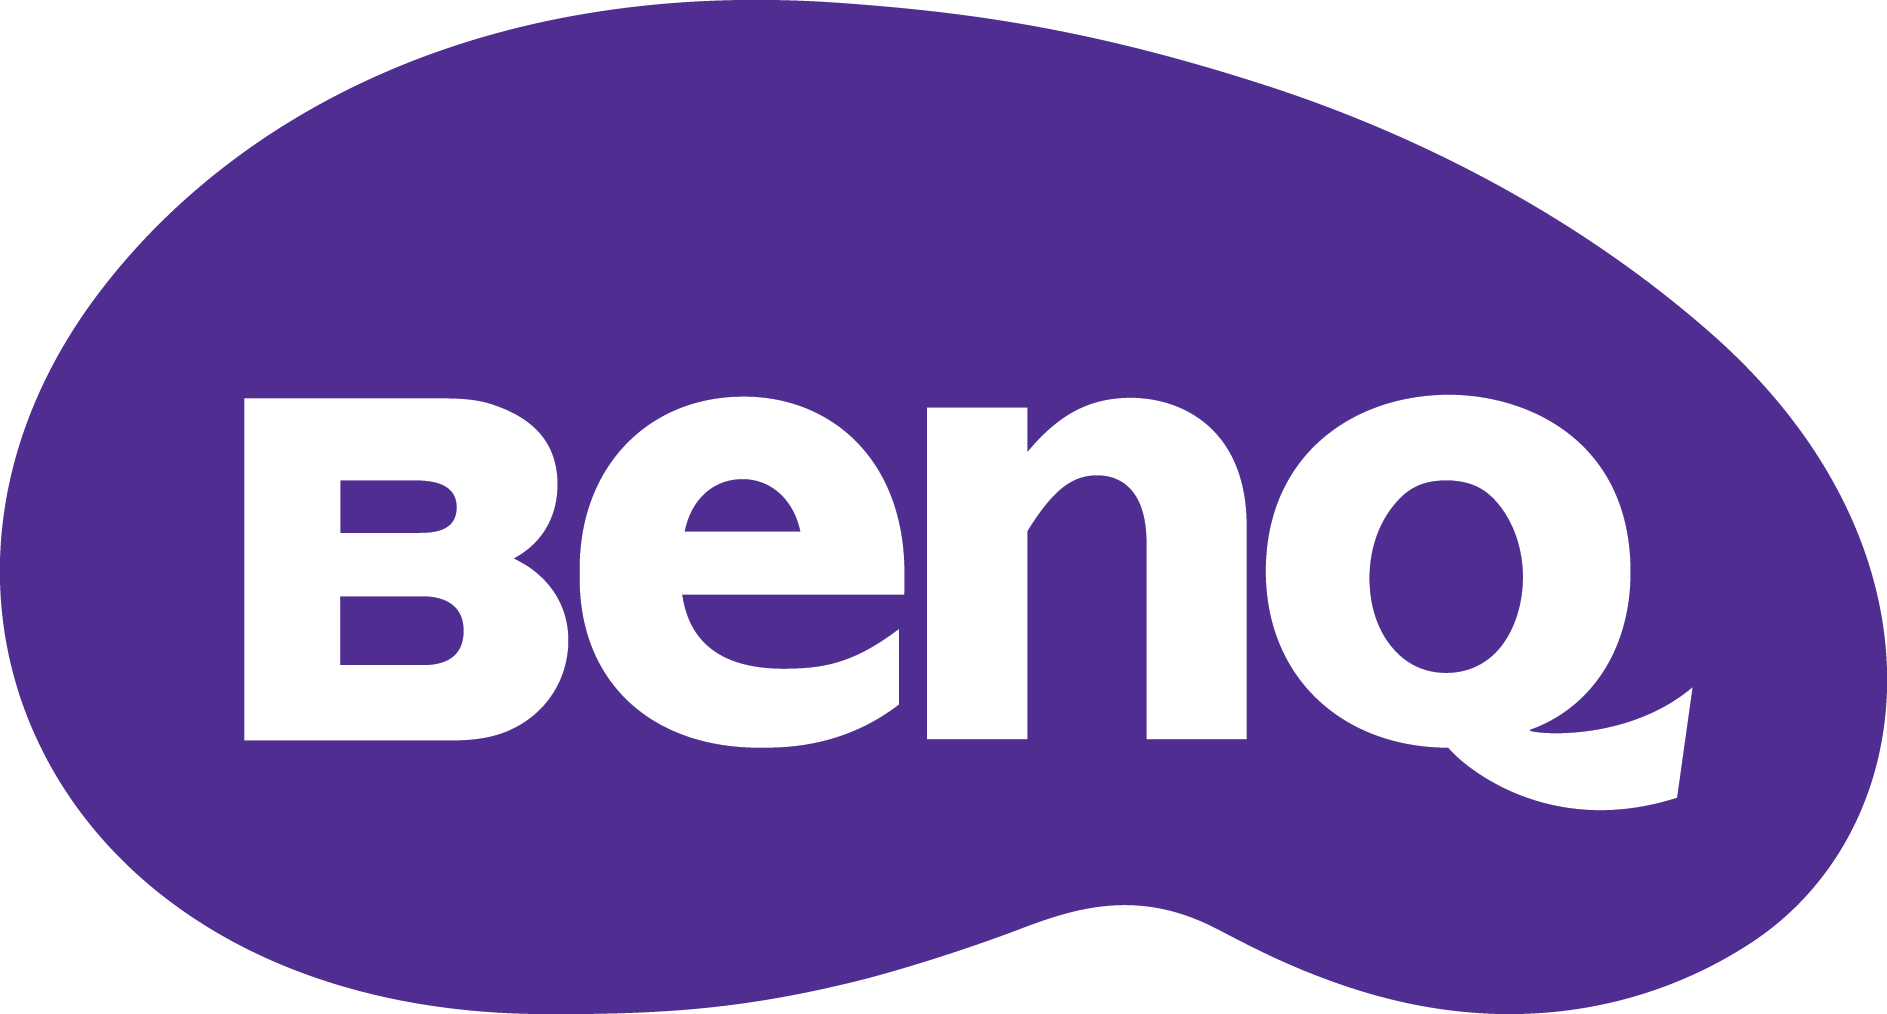 Benq Logo. Purple shape with the wordmark in white letters BenQ in capitals.